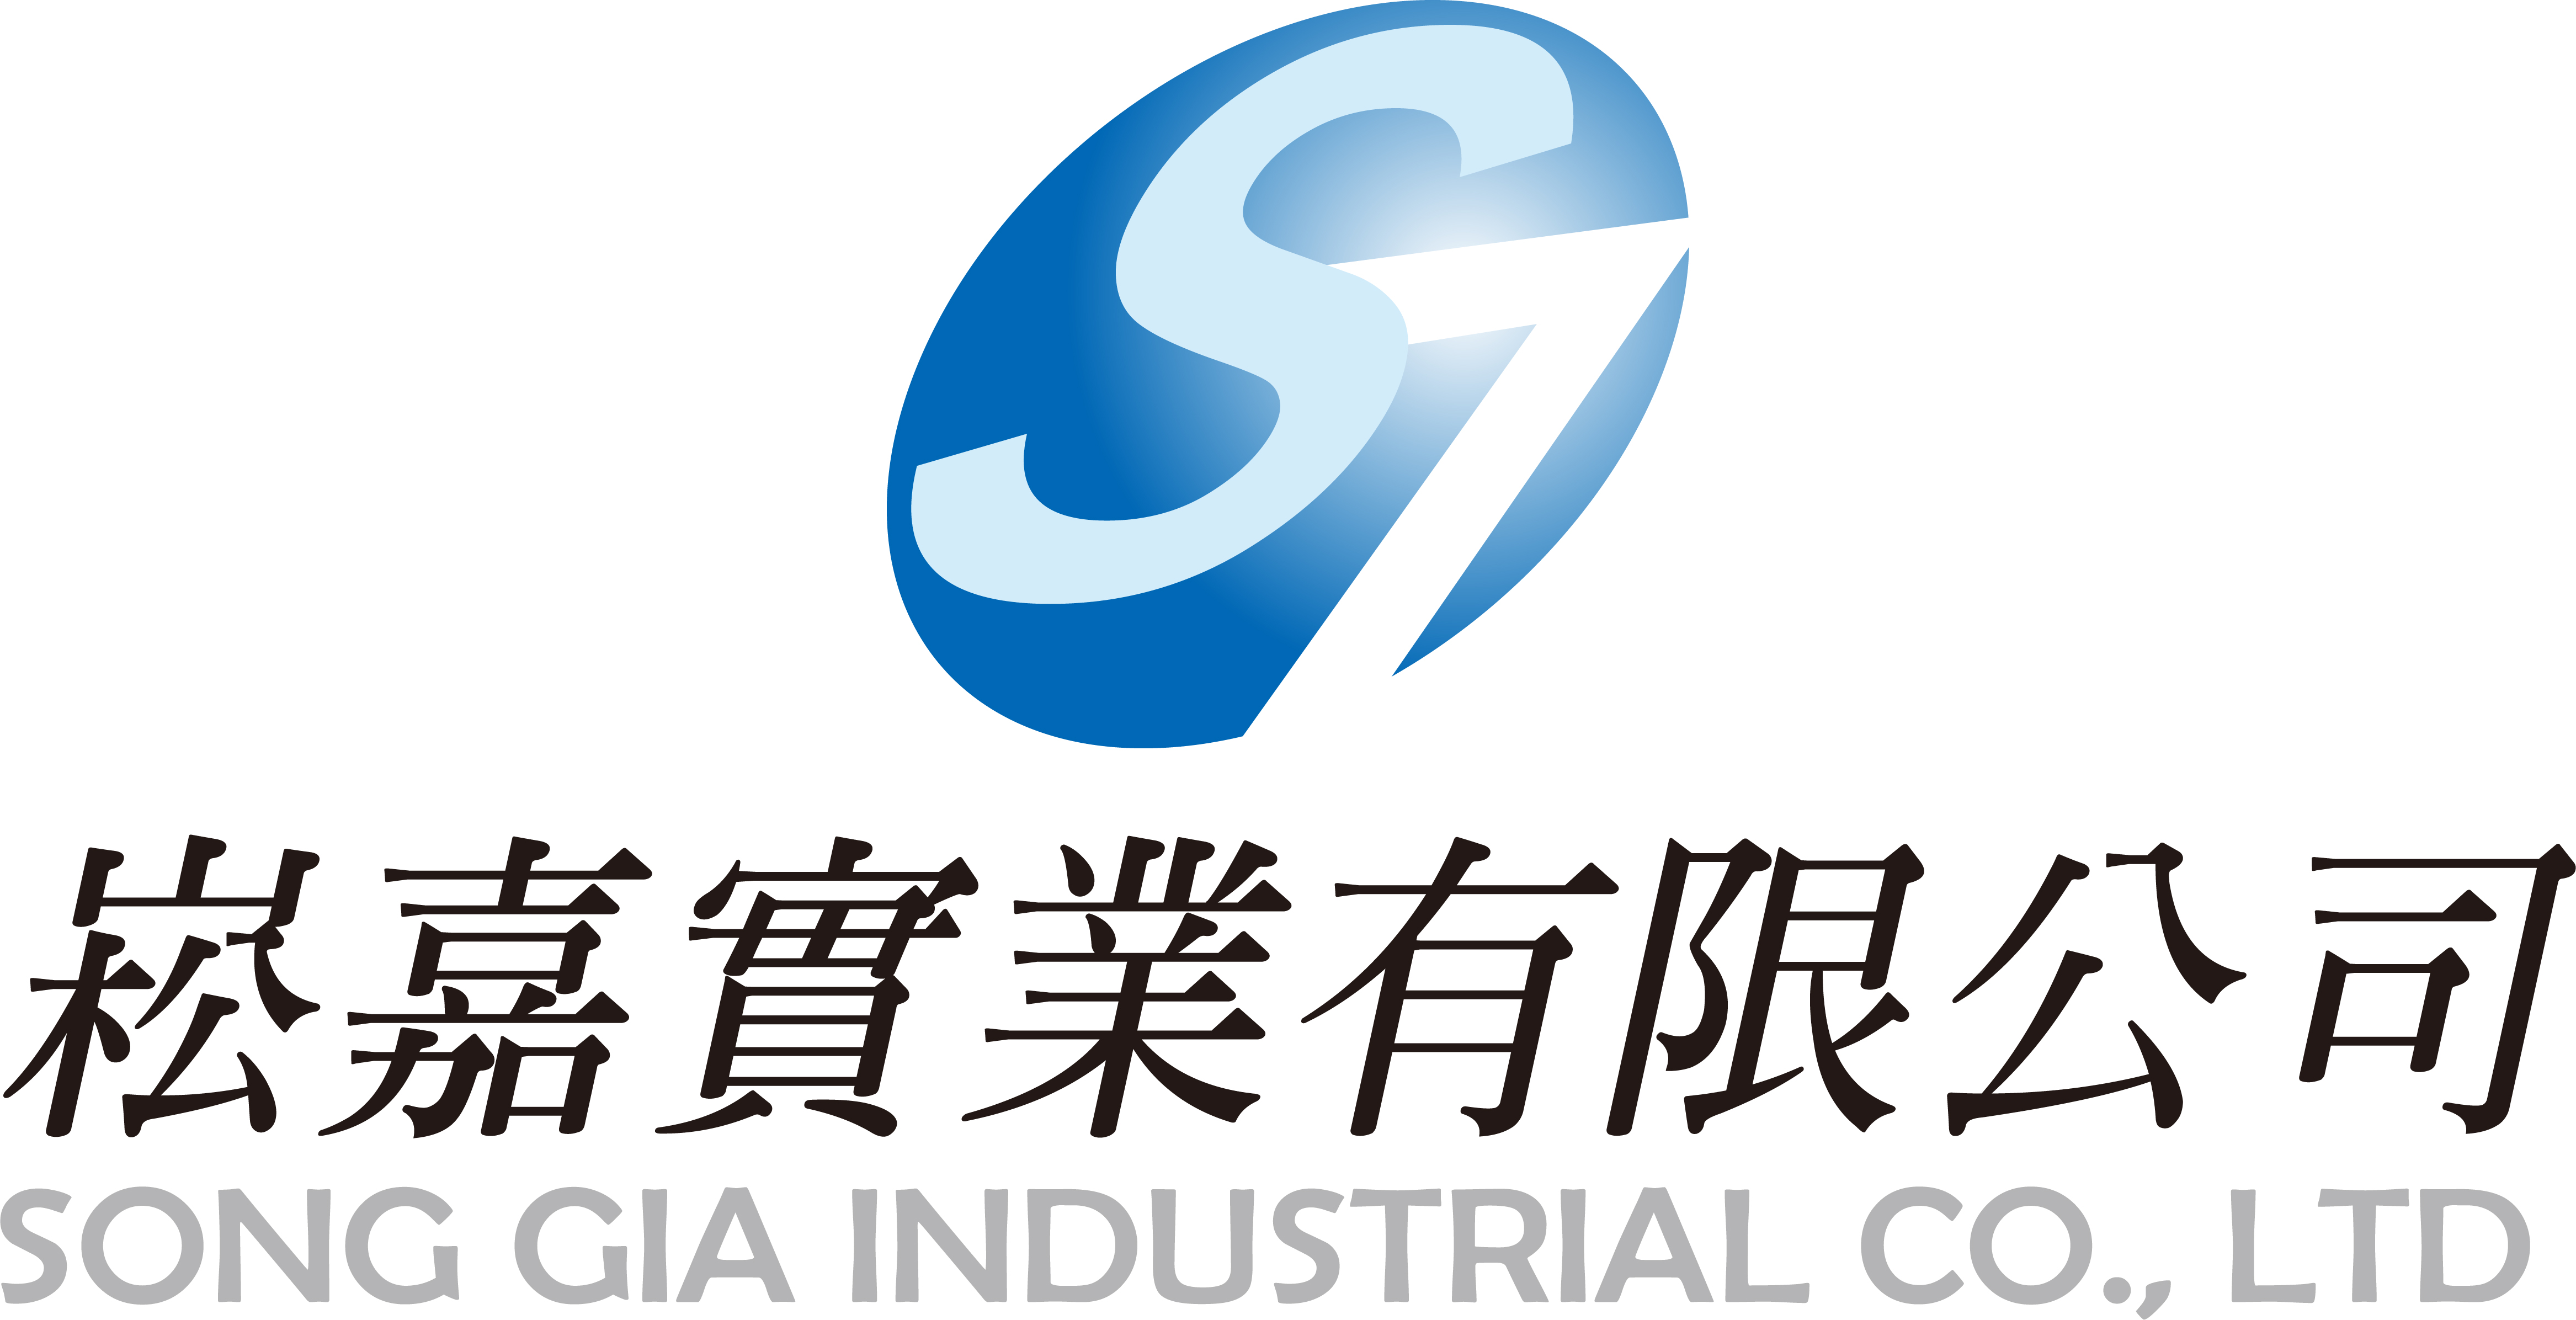 SONG GIA INDUSTRIAL CO., LTD.